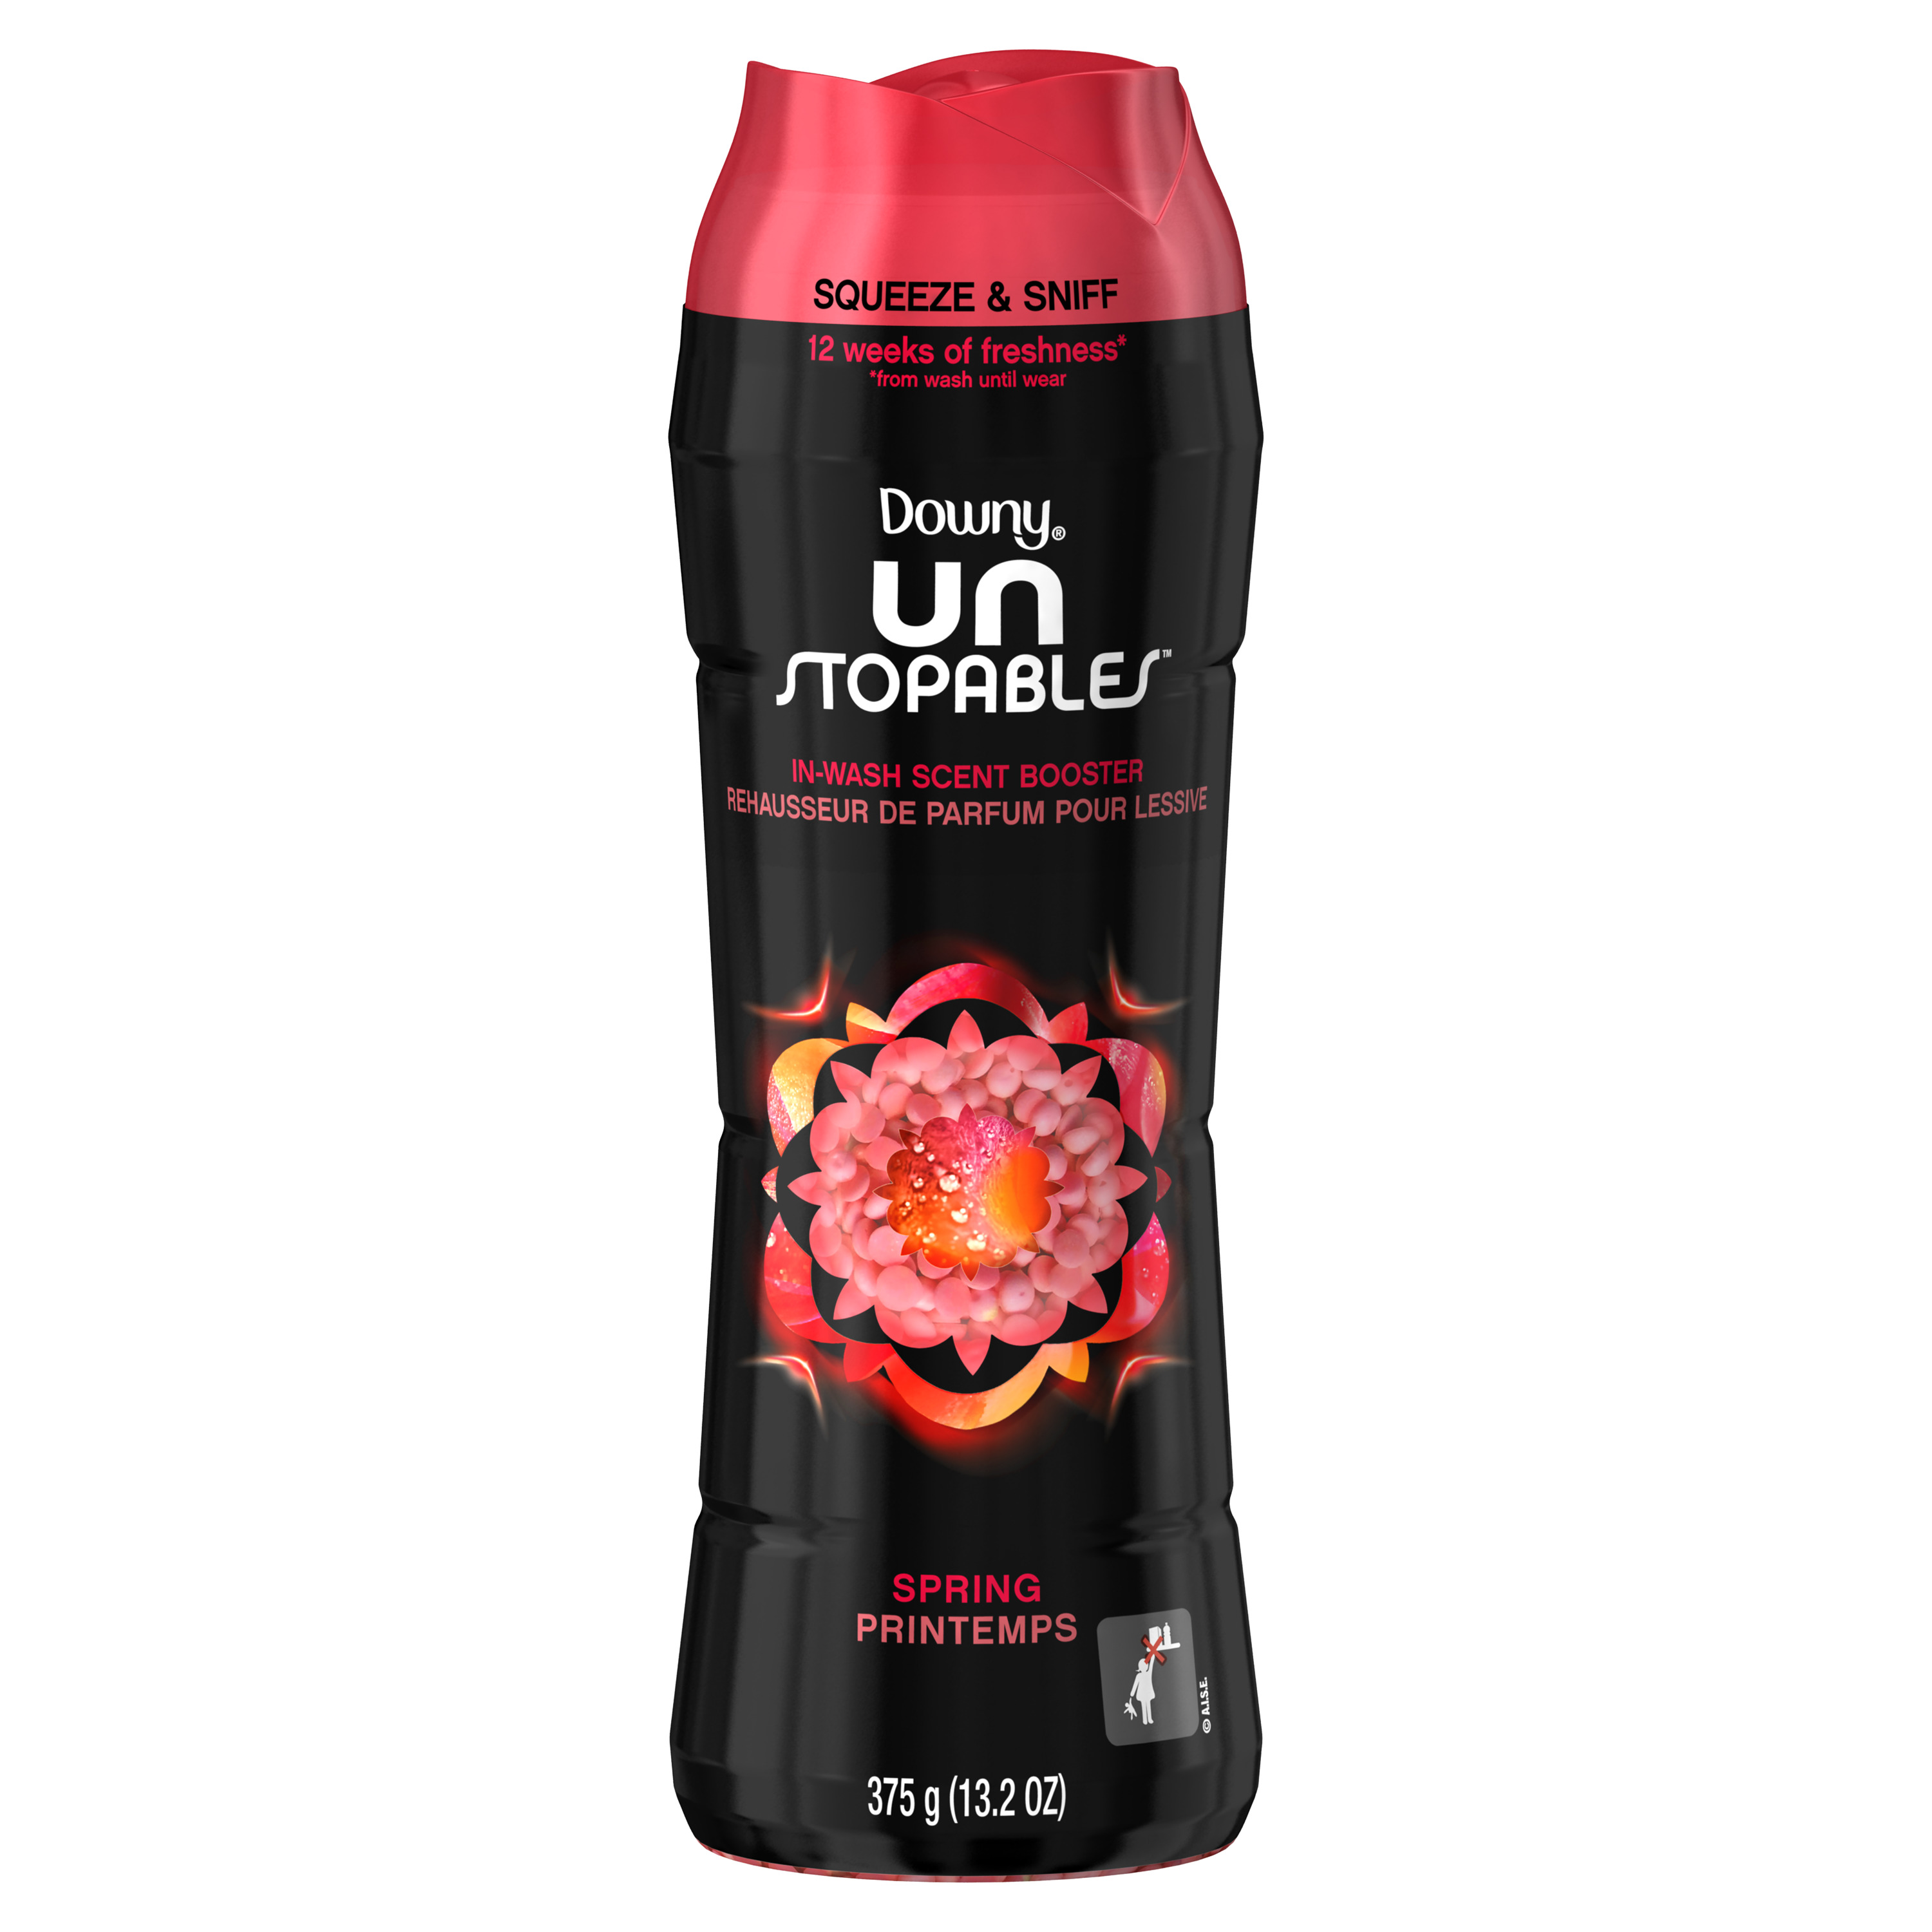 Downy Unstopables In-Wash Scent Booster Beads - SPRING, 13.2 oz. - image 1 of 6